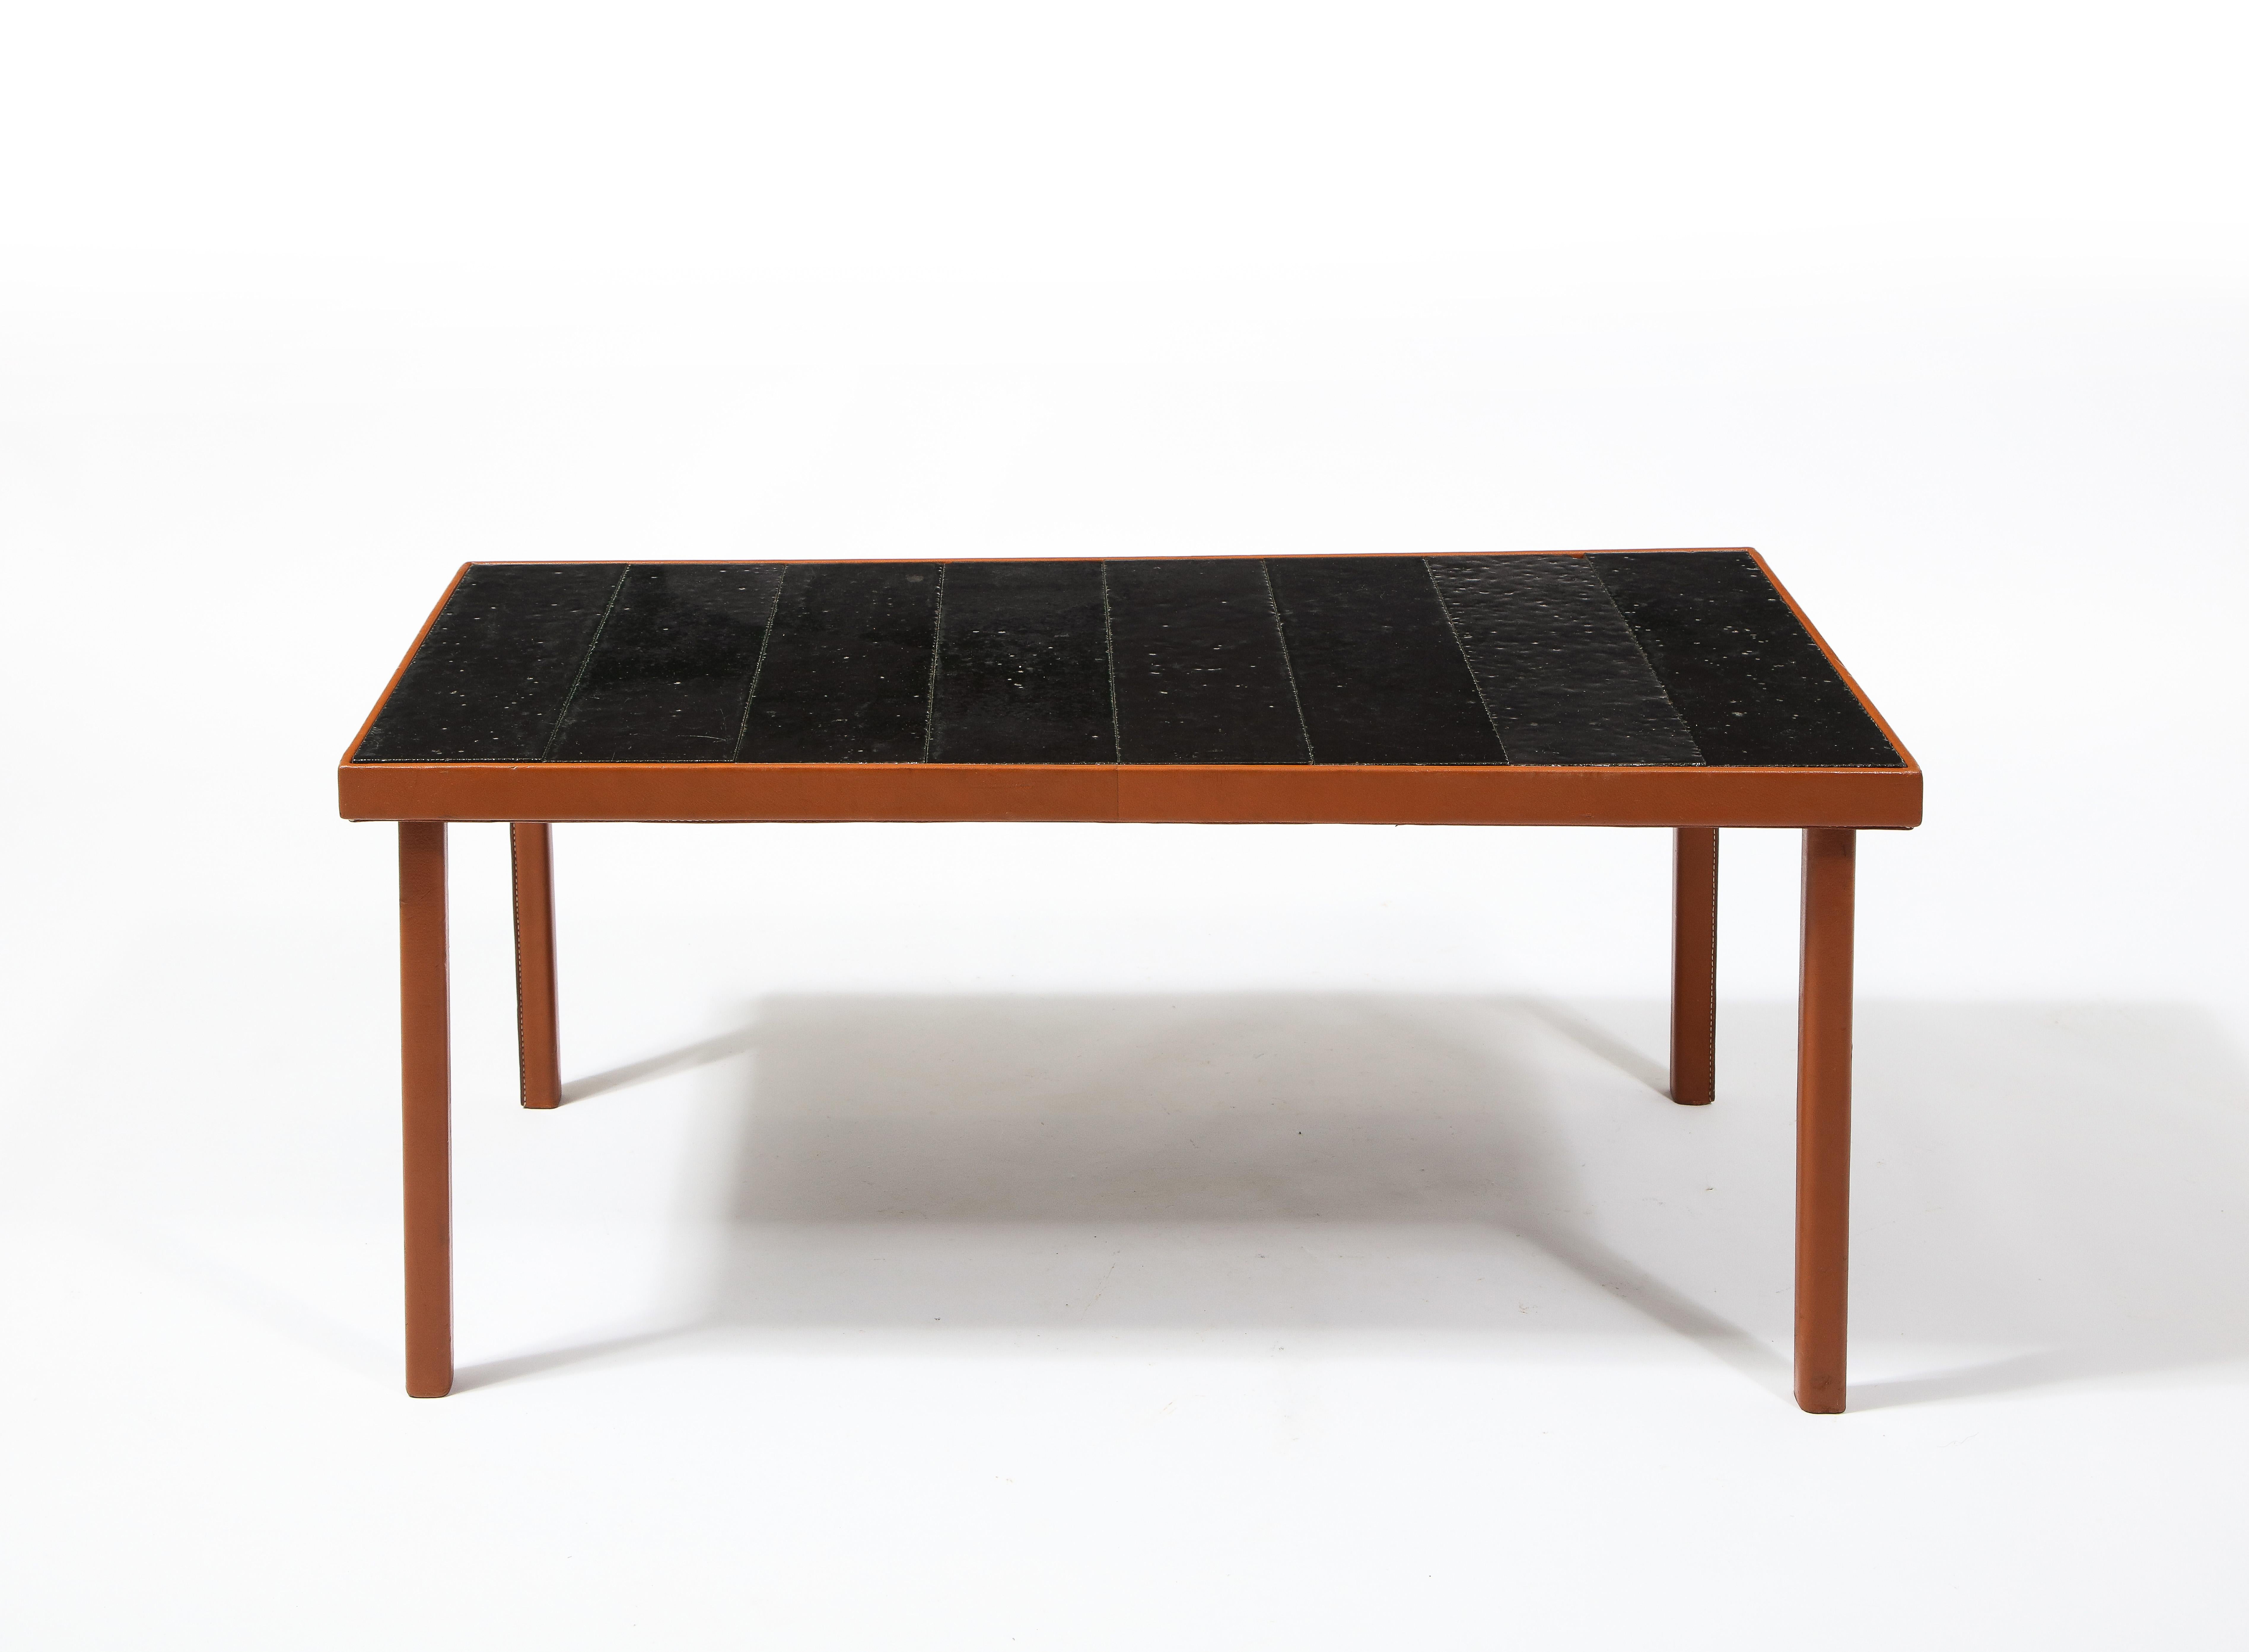 Adnet Style Leather & Dark Jouve Style Lava Stone Tiles Table, France 1950's For Sale 3